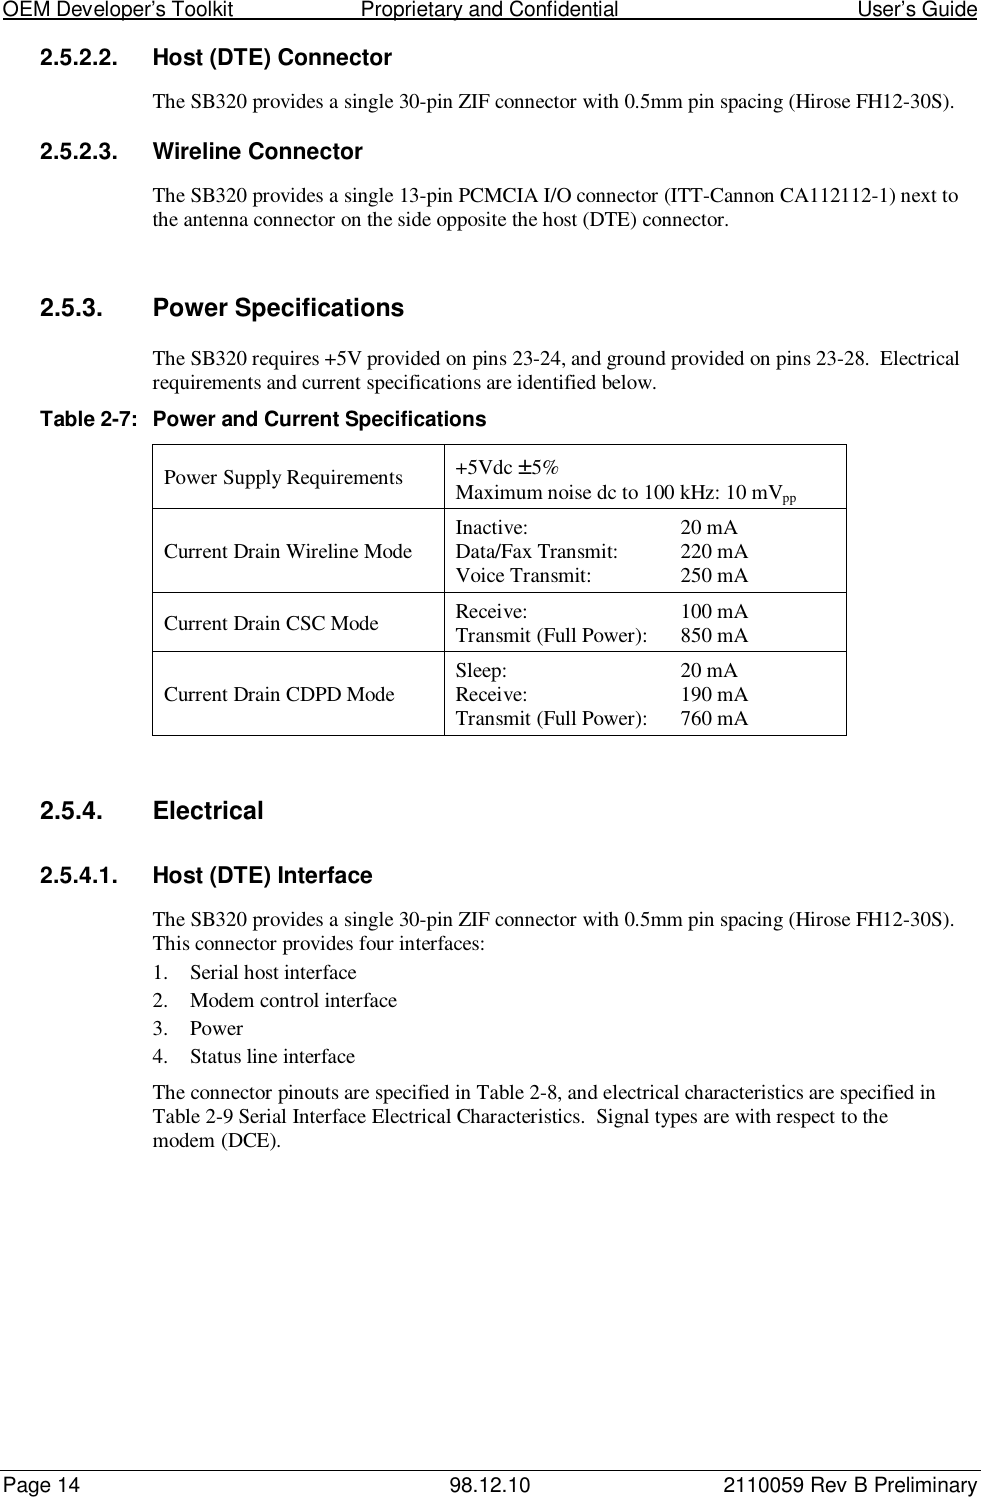 OEM Developer’s Toolkit                        Proprietary and Confidential                                        User’s GuidePage 14 98.12.10 2110059 Rev B Preliminary2.5.2.2.  Host (DTE) ConnectorThe SB320 provides a single 30-pin ZIF connector with 0.5mm pin spacing (Hirose FH12-30S).2.5.2.3.  Wireline ConnectorThe SB320 provides a single 13-pin PCMCIA I/O connector (ITT-Cannon CA112112-1) next tothe antenna connector on the side opposite the host (DTE) connector.2.5.3.  Power SpecificationsThe SB320 requires +5V provided on pins 23-24, and ground provided on pins 23-28.  Electricalrequirements and current specifications are identified below.Table 2-7: Power and Current SpecificationsPower Supply Requirements +5Vdc ±5%Maximum noise dc to 100 kHz: 10 mVppCurrent Drain Wireline Mode Inactive: 20 mAData/Fax Transmit: 220 mAVoice Transmit: 250 mACurrent Drain CSC Mode Receive: 100 mATransmit (Full Power): 850 mACurrent Drain CDPD Mode Sleep: 20 mAReceive: 190 mATransmit (Full Power): 760 mA2.5.4. Electrical2.5.4.1.  Host (DTE) InterfaceThe SB320 provides a single 30-pin ZIF connector with 0.5mm pin spacing (Hirose FH12-30S).This connector provides four interfaces:1. Serial host interface2. Modem control interface3. Power4. Status line interfaceThe connector pinouts are specified in Table 2-8, and electrical characteristics are specified inTable 2-9 Serial Interface Electrical Characteristics.  Signal types are with respect to themodem (DCE).